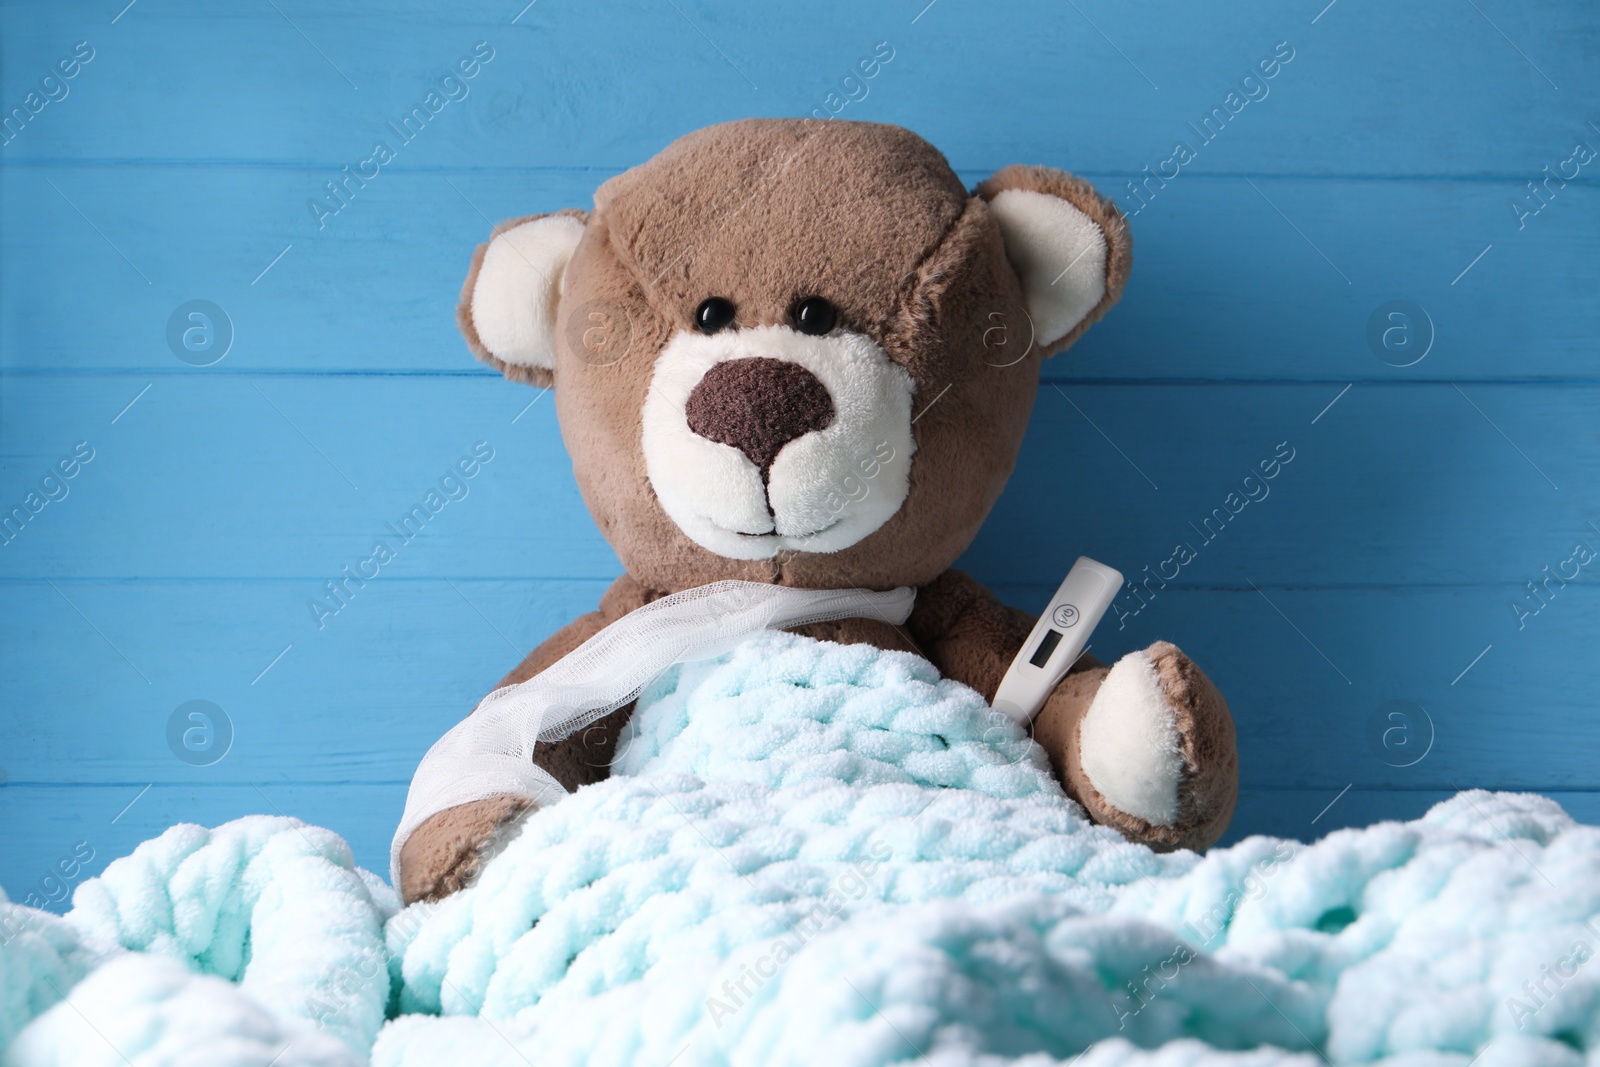 Photo of Toy bear with thermometer under blanket near blue wooden wall